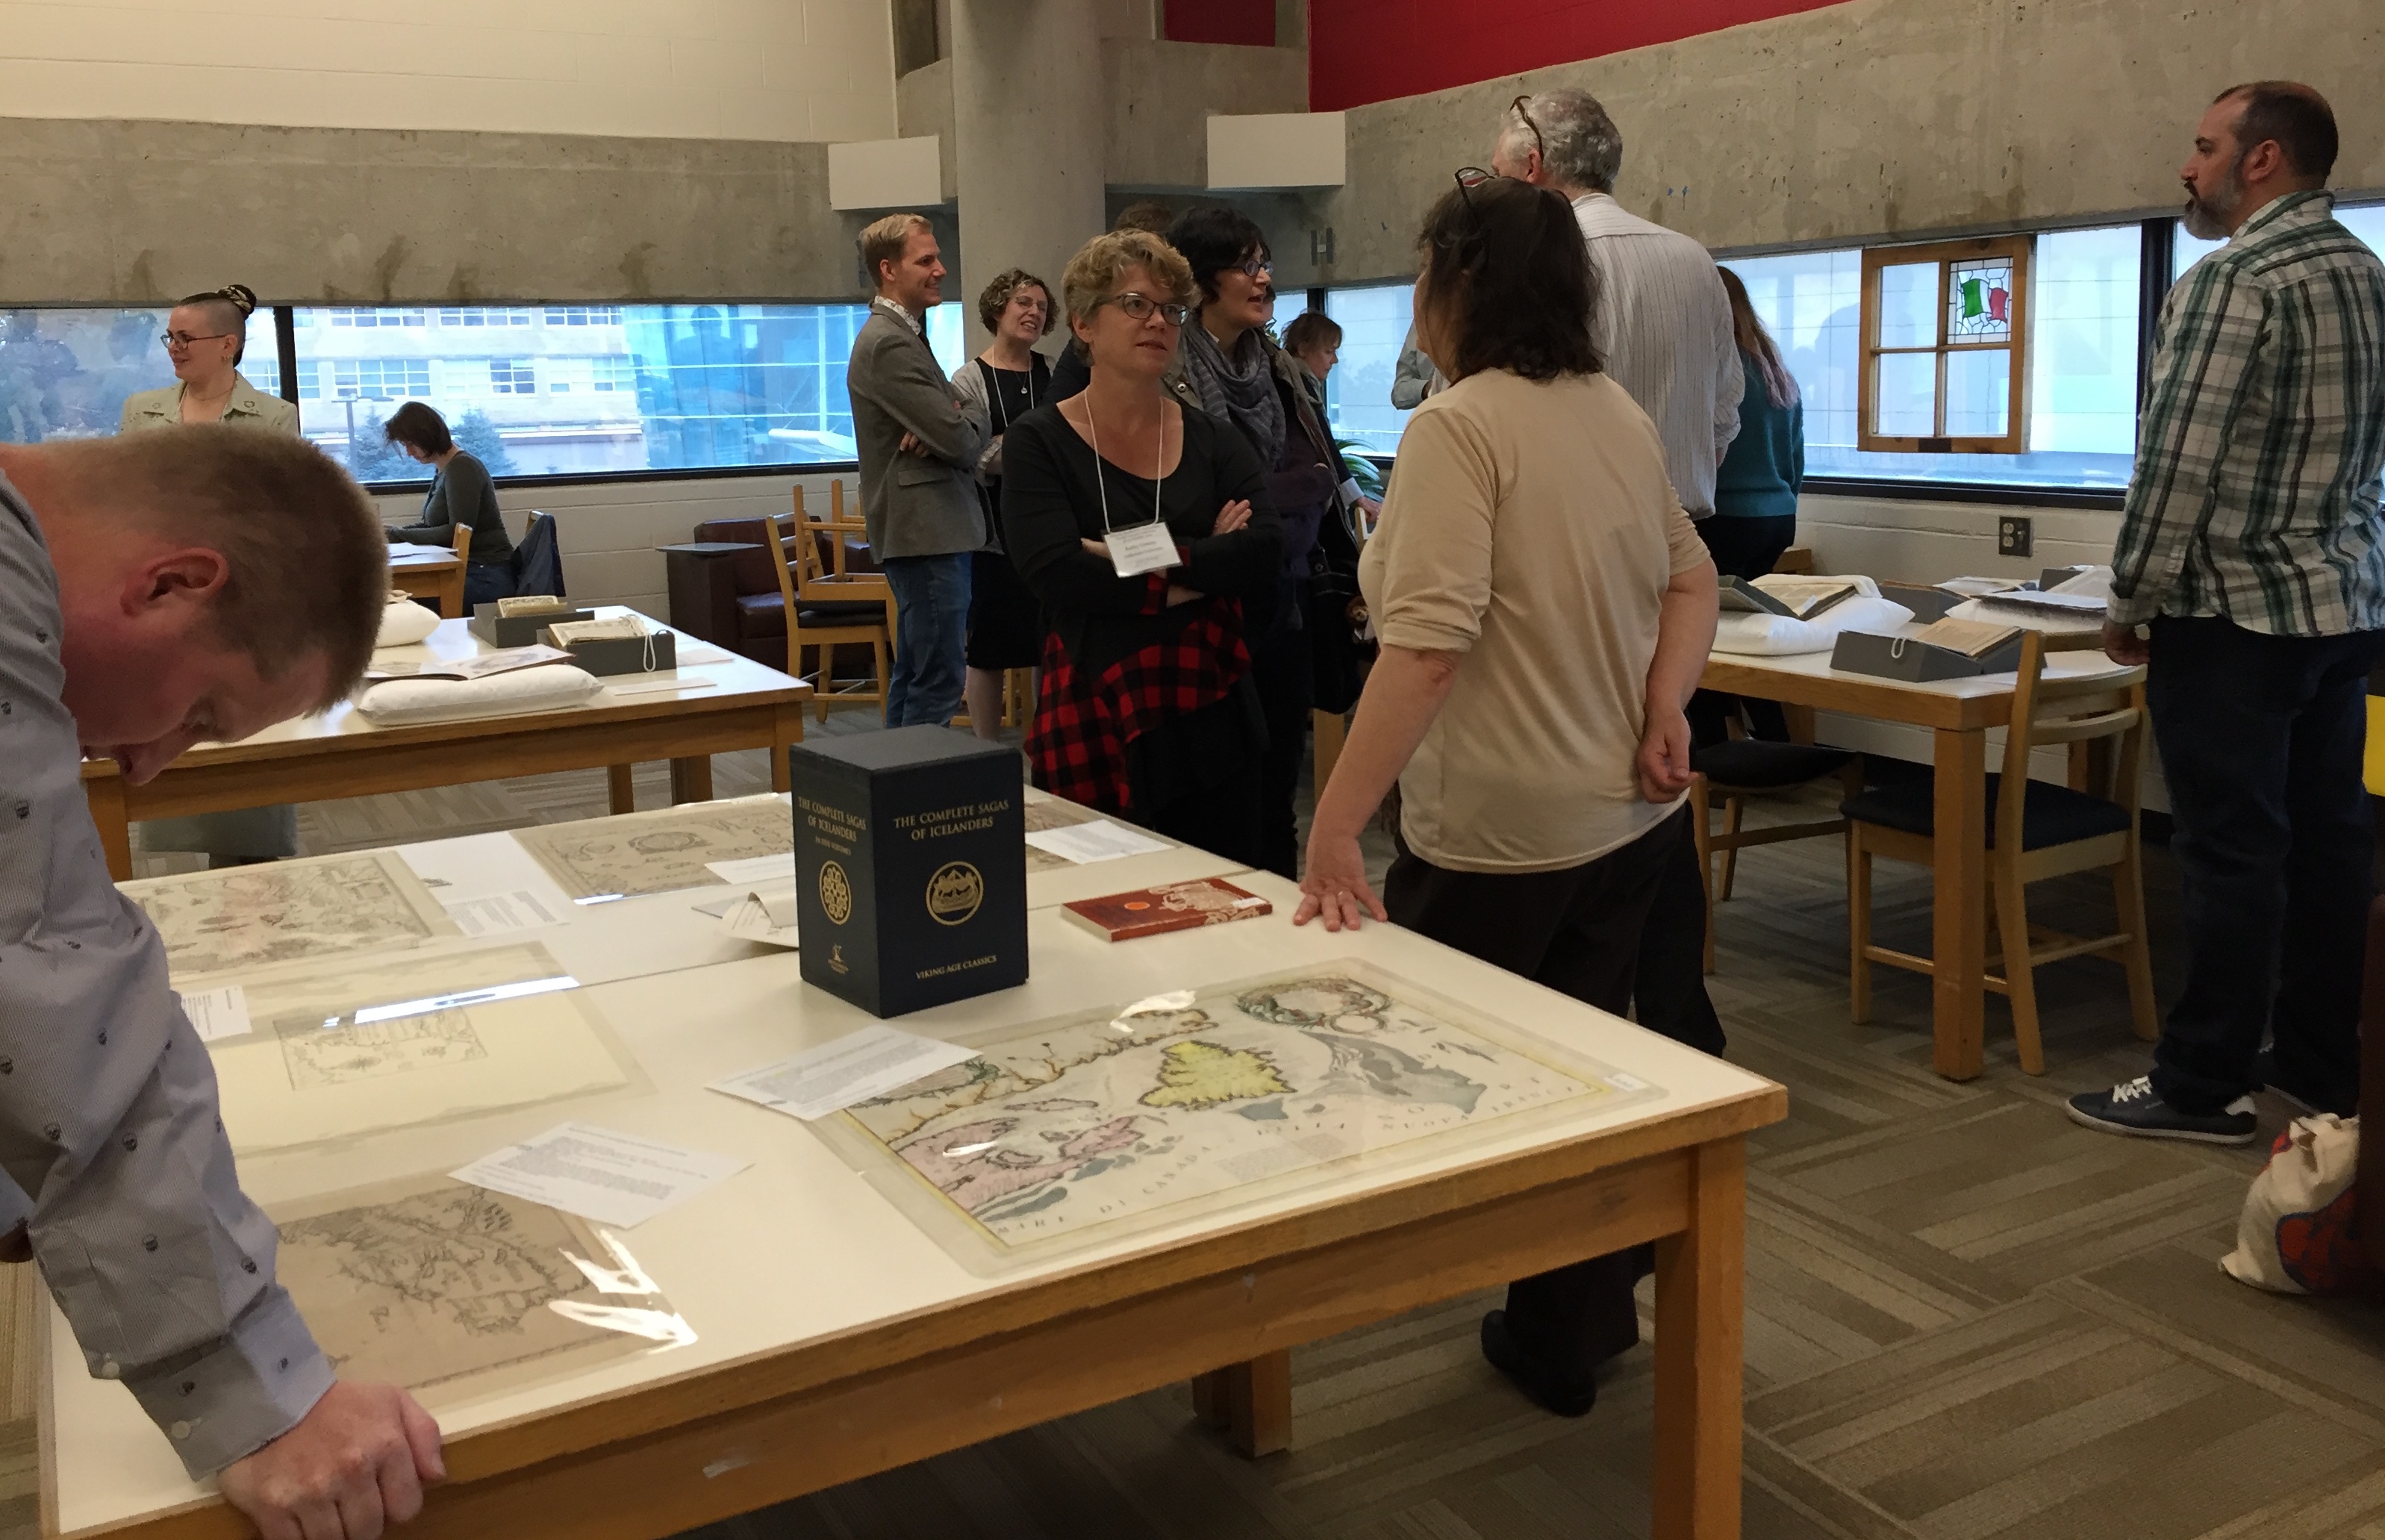 AMA conference 2019 - Discussion and debate at the MUN Library rare books, manuscript, and incunabula workshop.